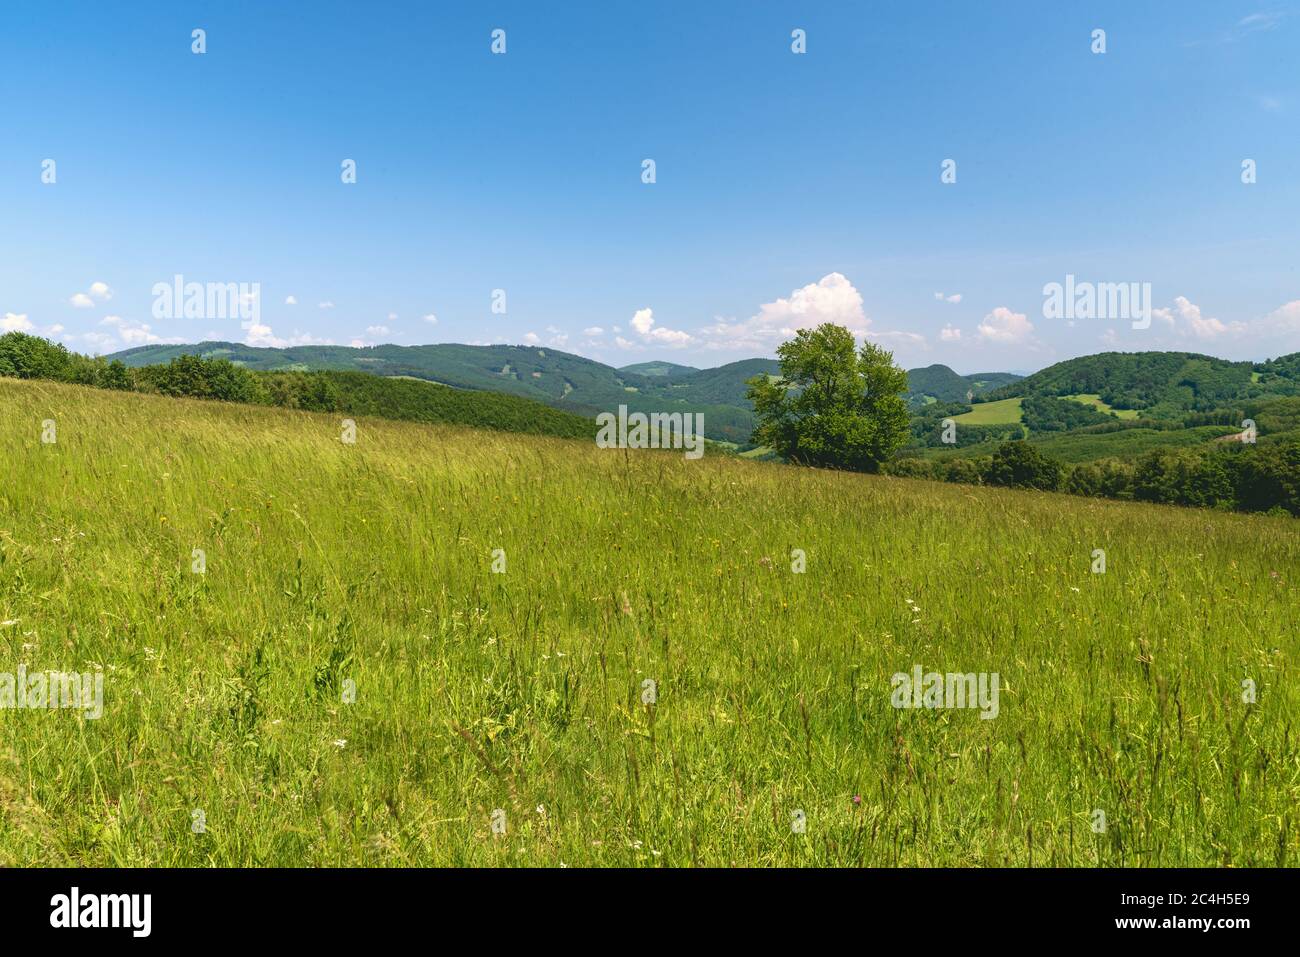 Beautiful Biele Karpaty mountains with hills coveted by mix of meadows and forest in Slovakia near Vrsatske Podhradie village during springtime day wi Stock Photo